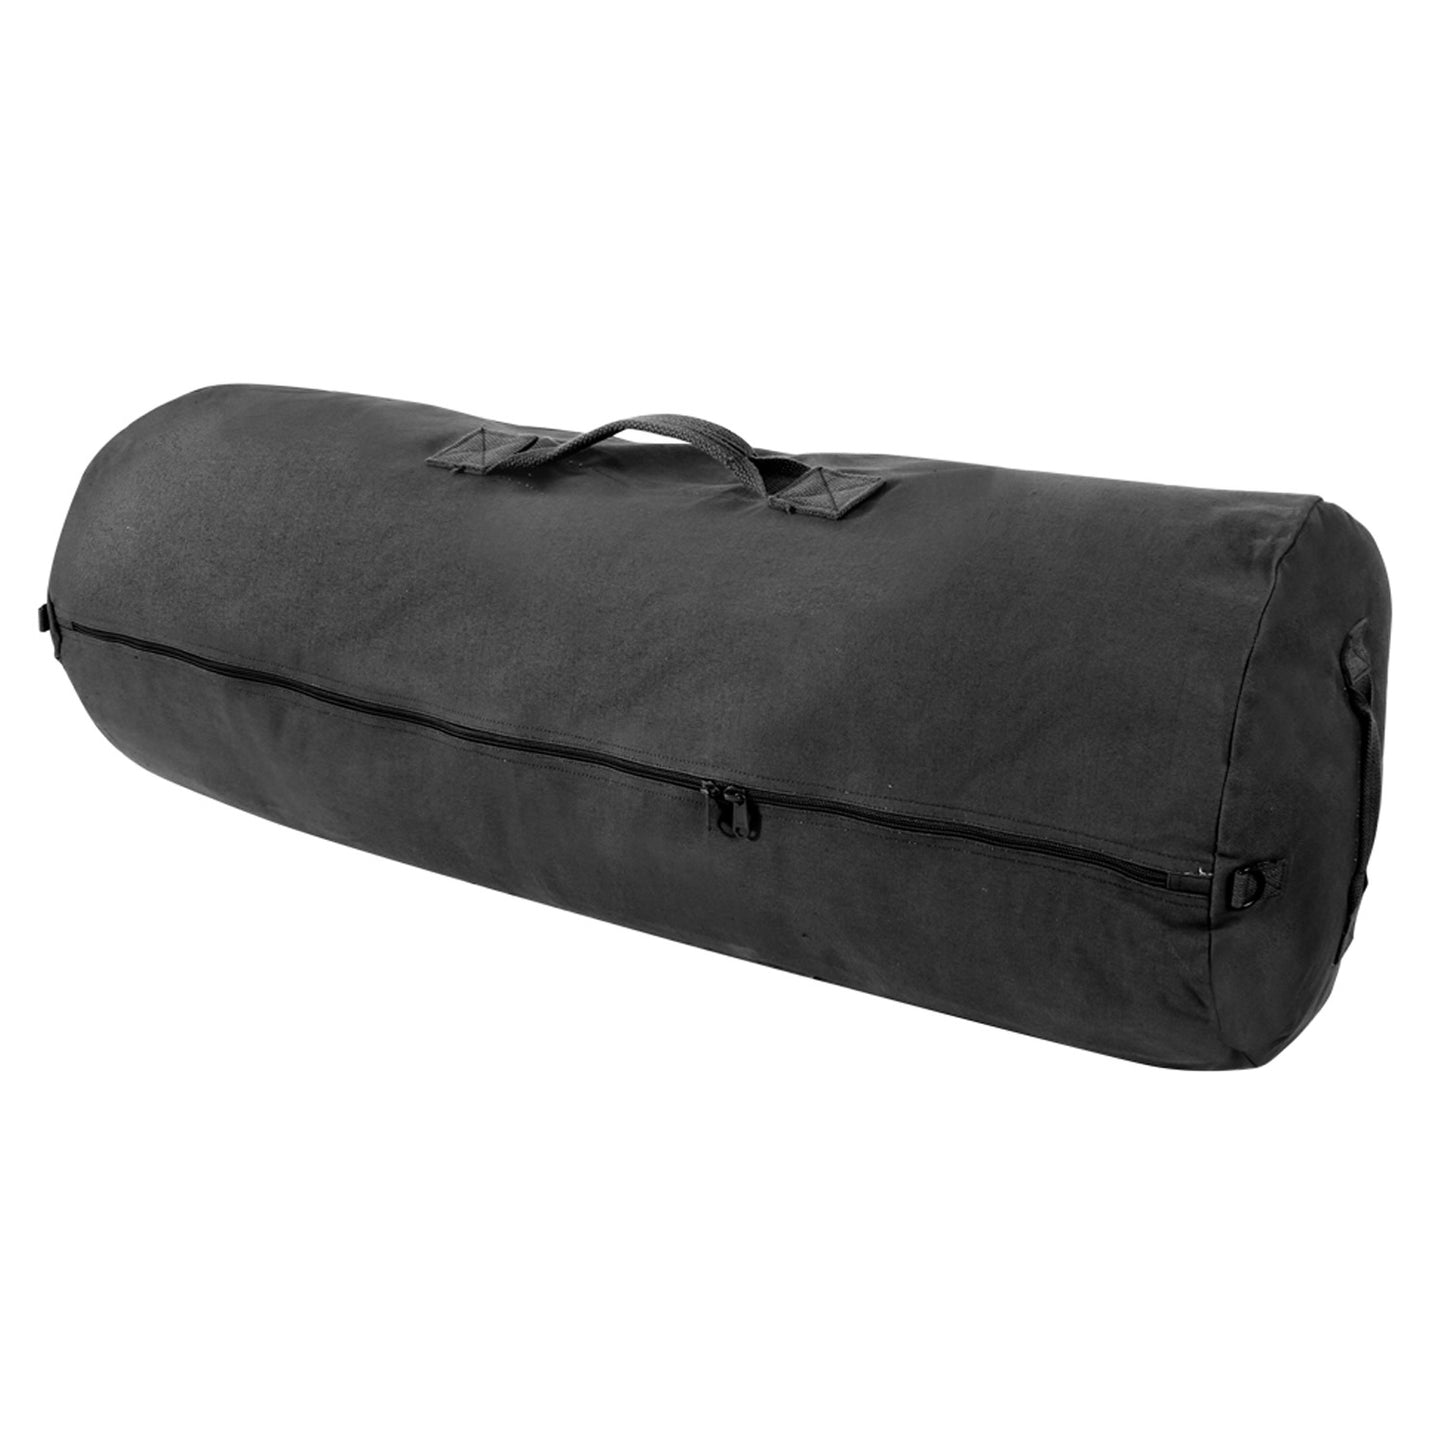 Rothco Canvas Duffle Bag with Side Zipper